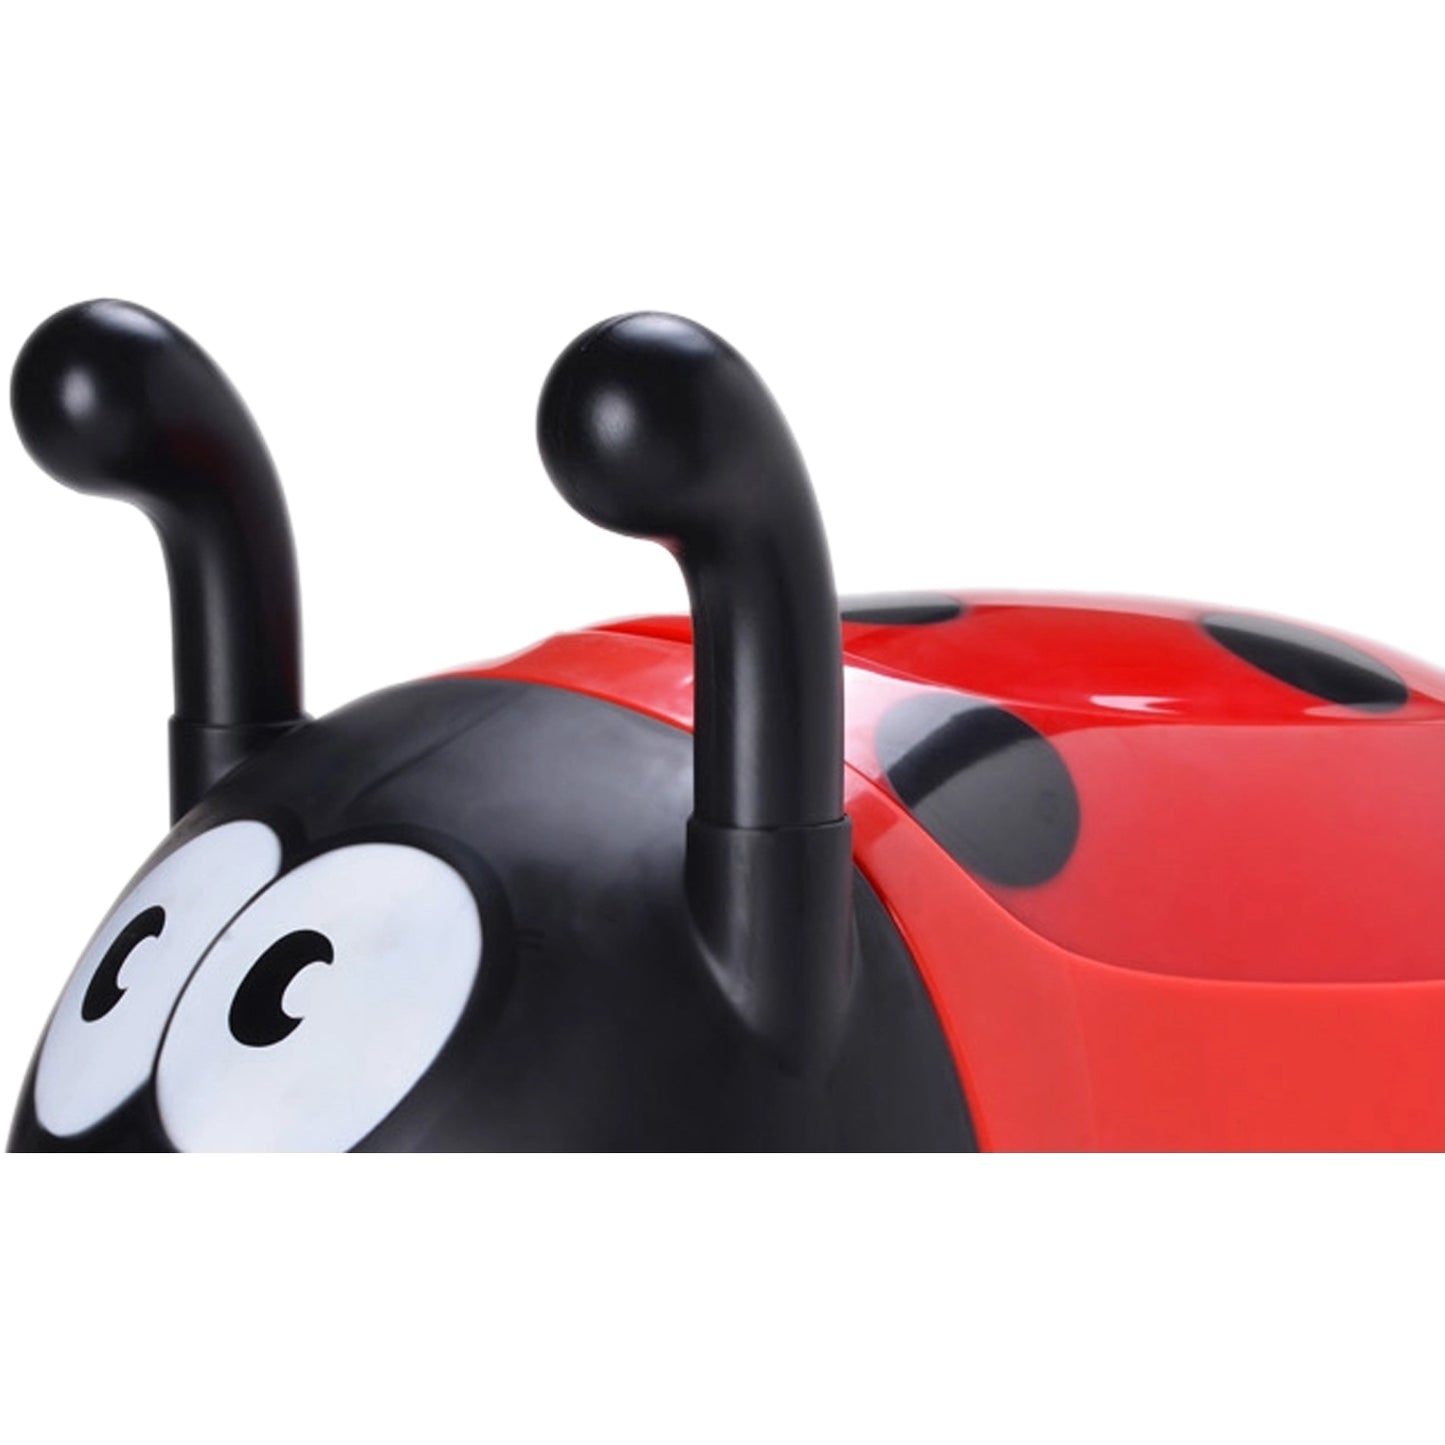 Insect Shaped Potty Trainer